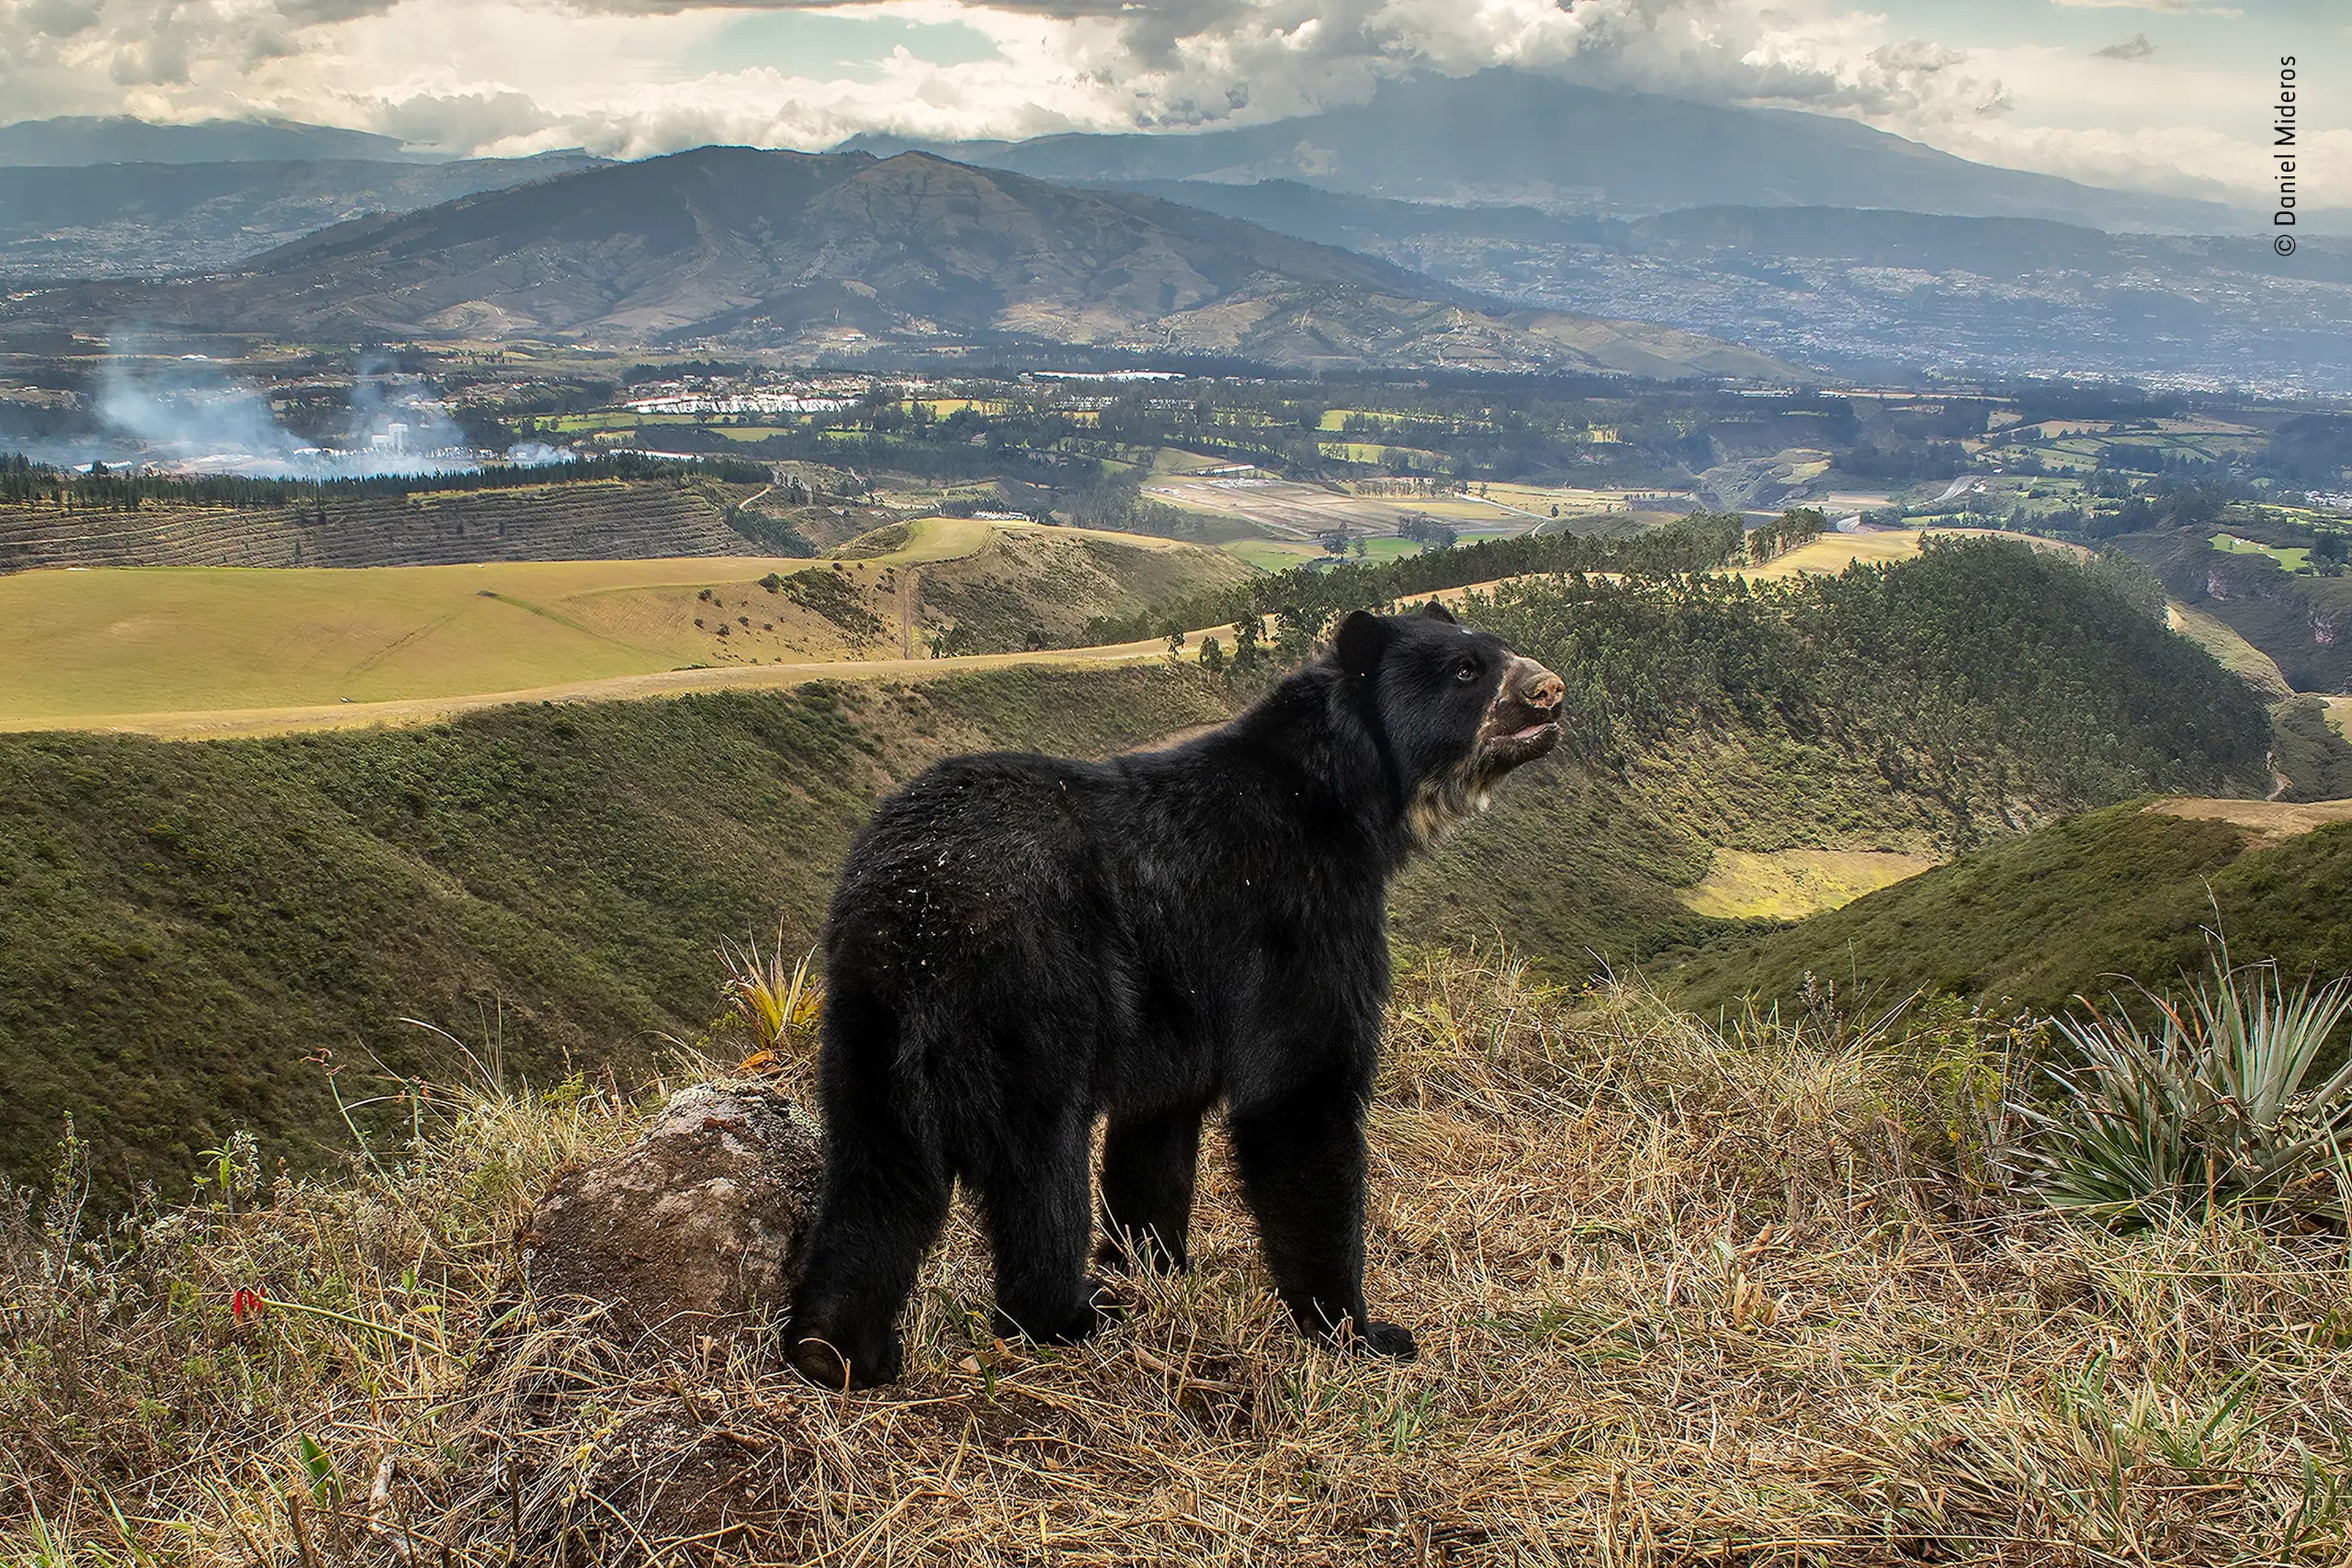 black bear stands on hill above town